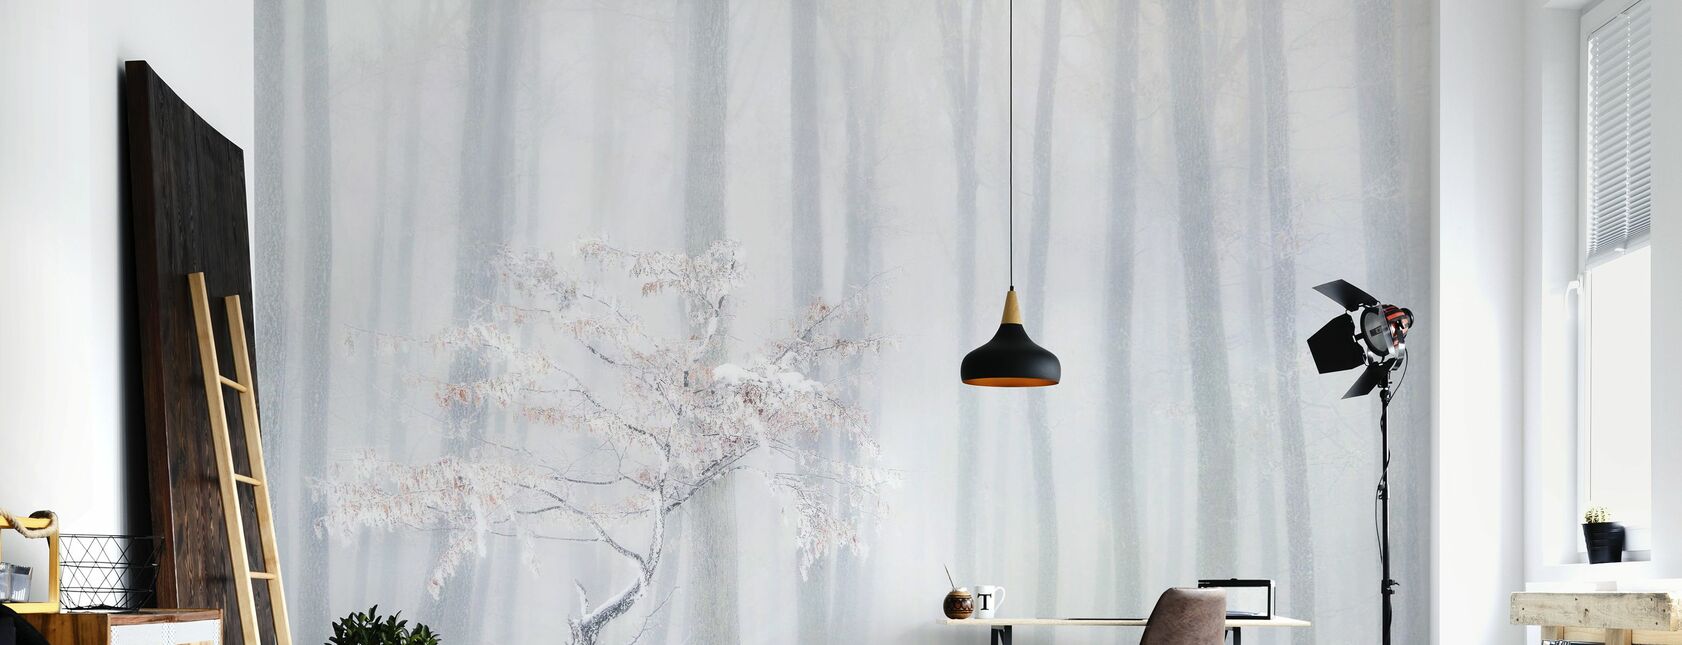 In front of the Misty Curtain - Wallpaper - teen-room